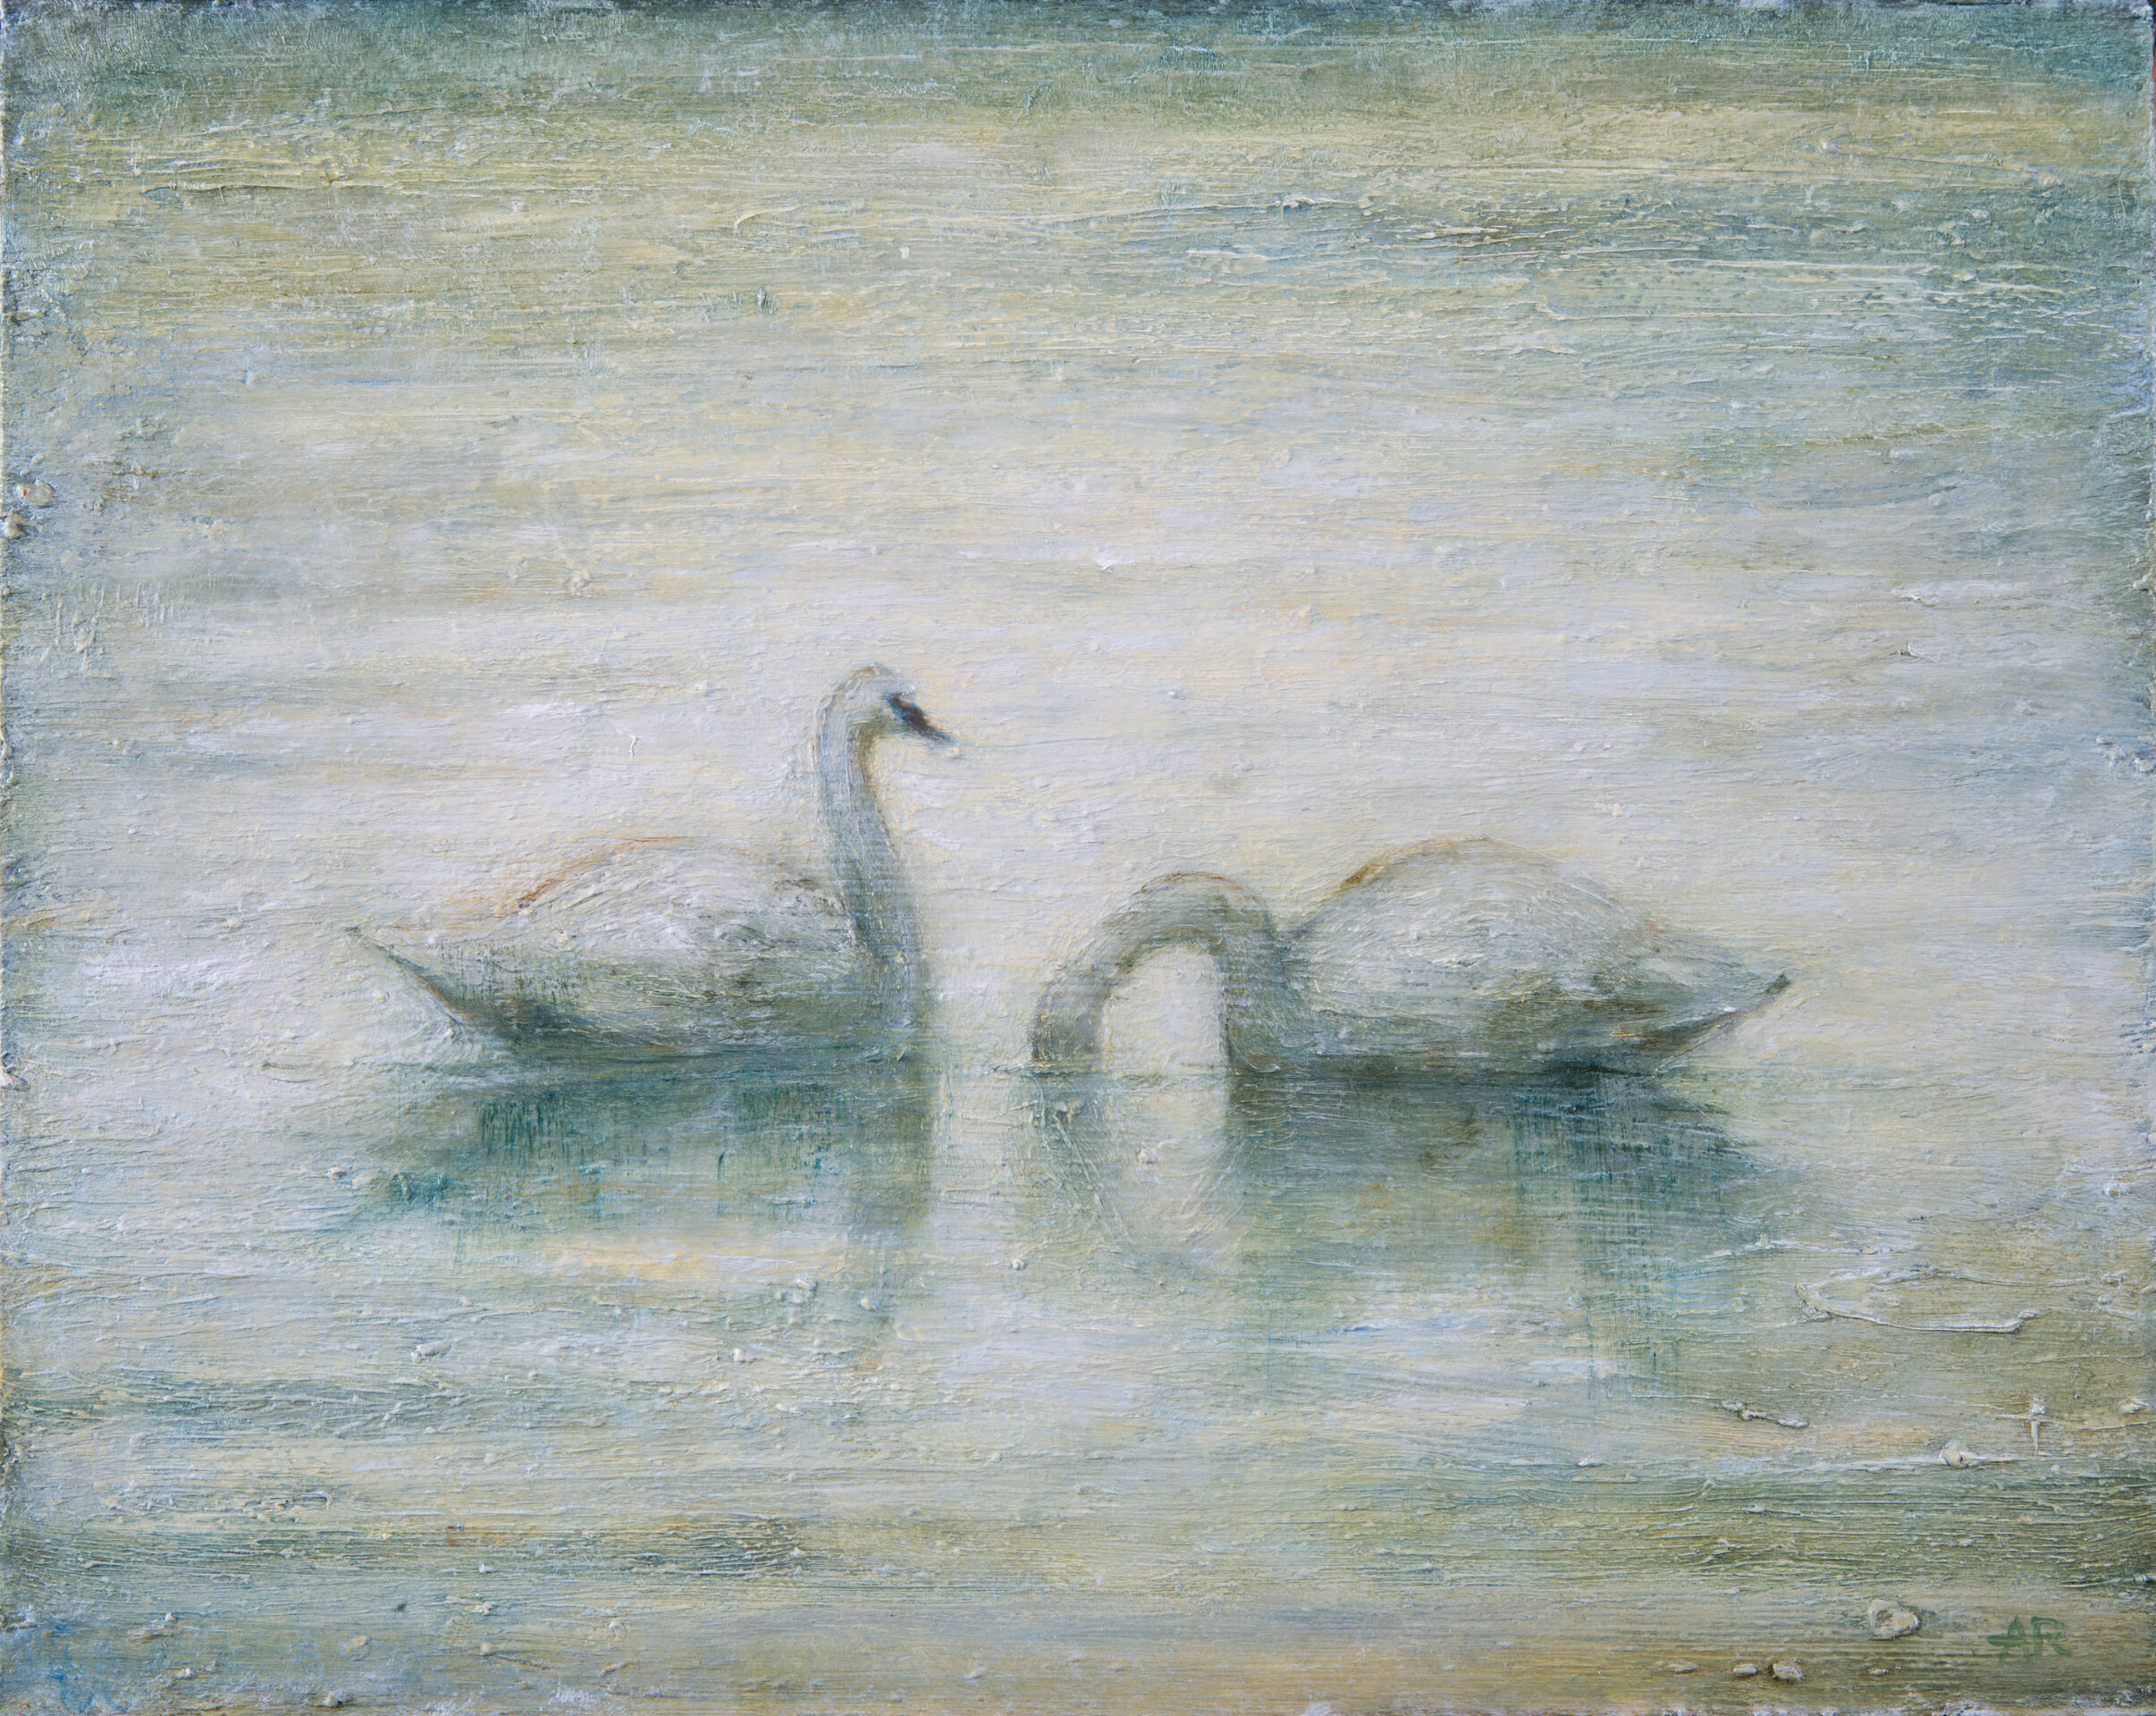 Winter Swans, 2020 - Painting 2